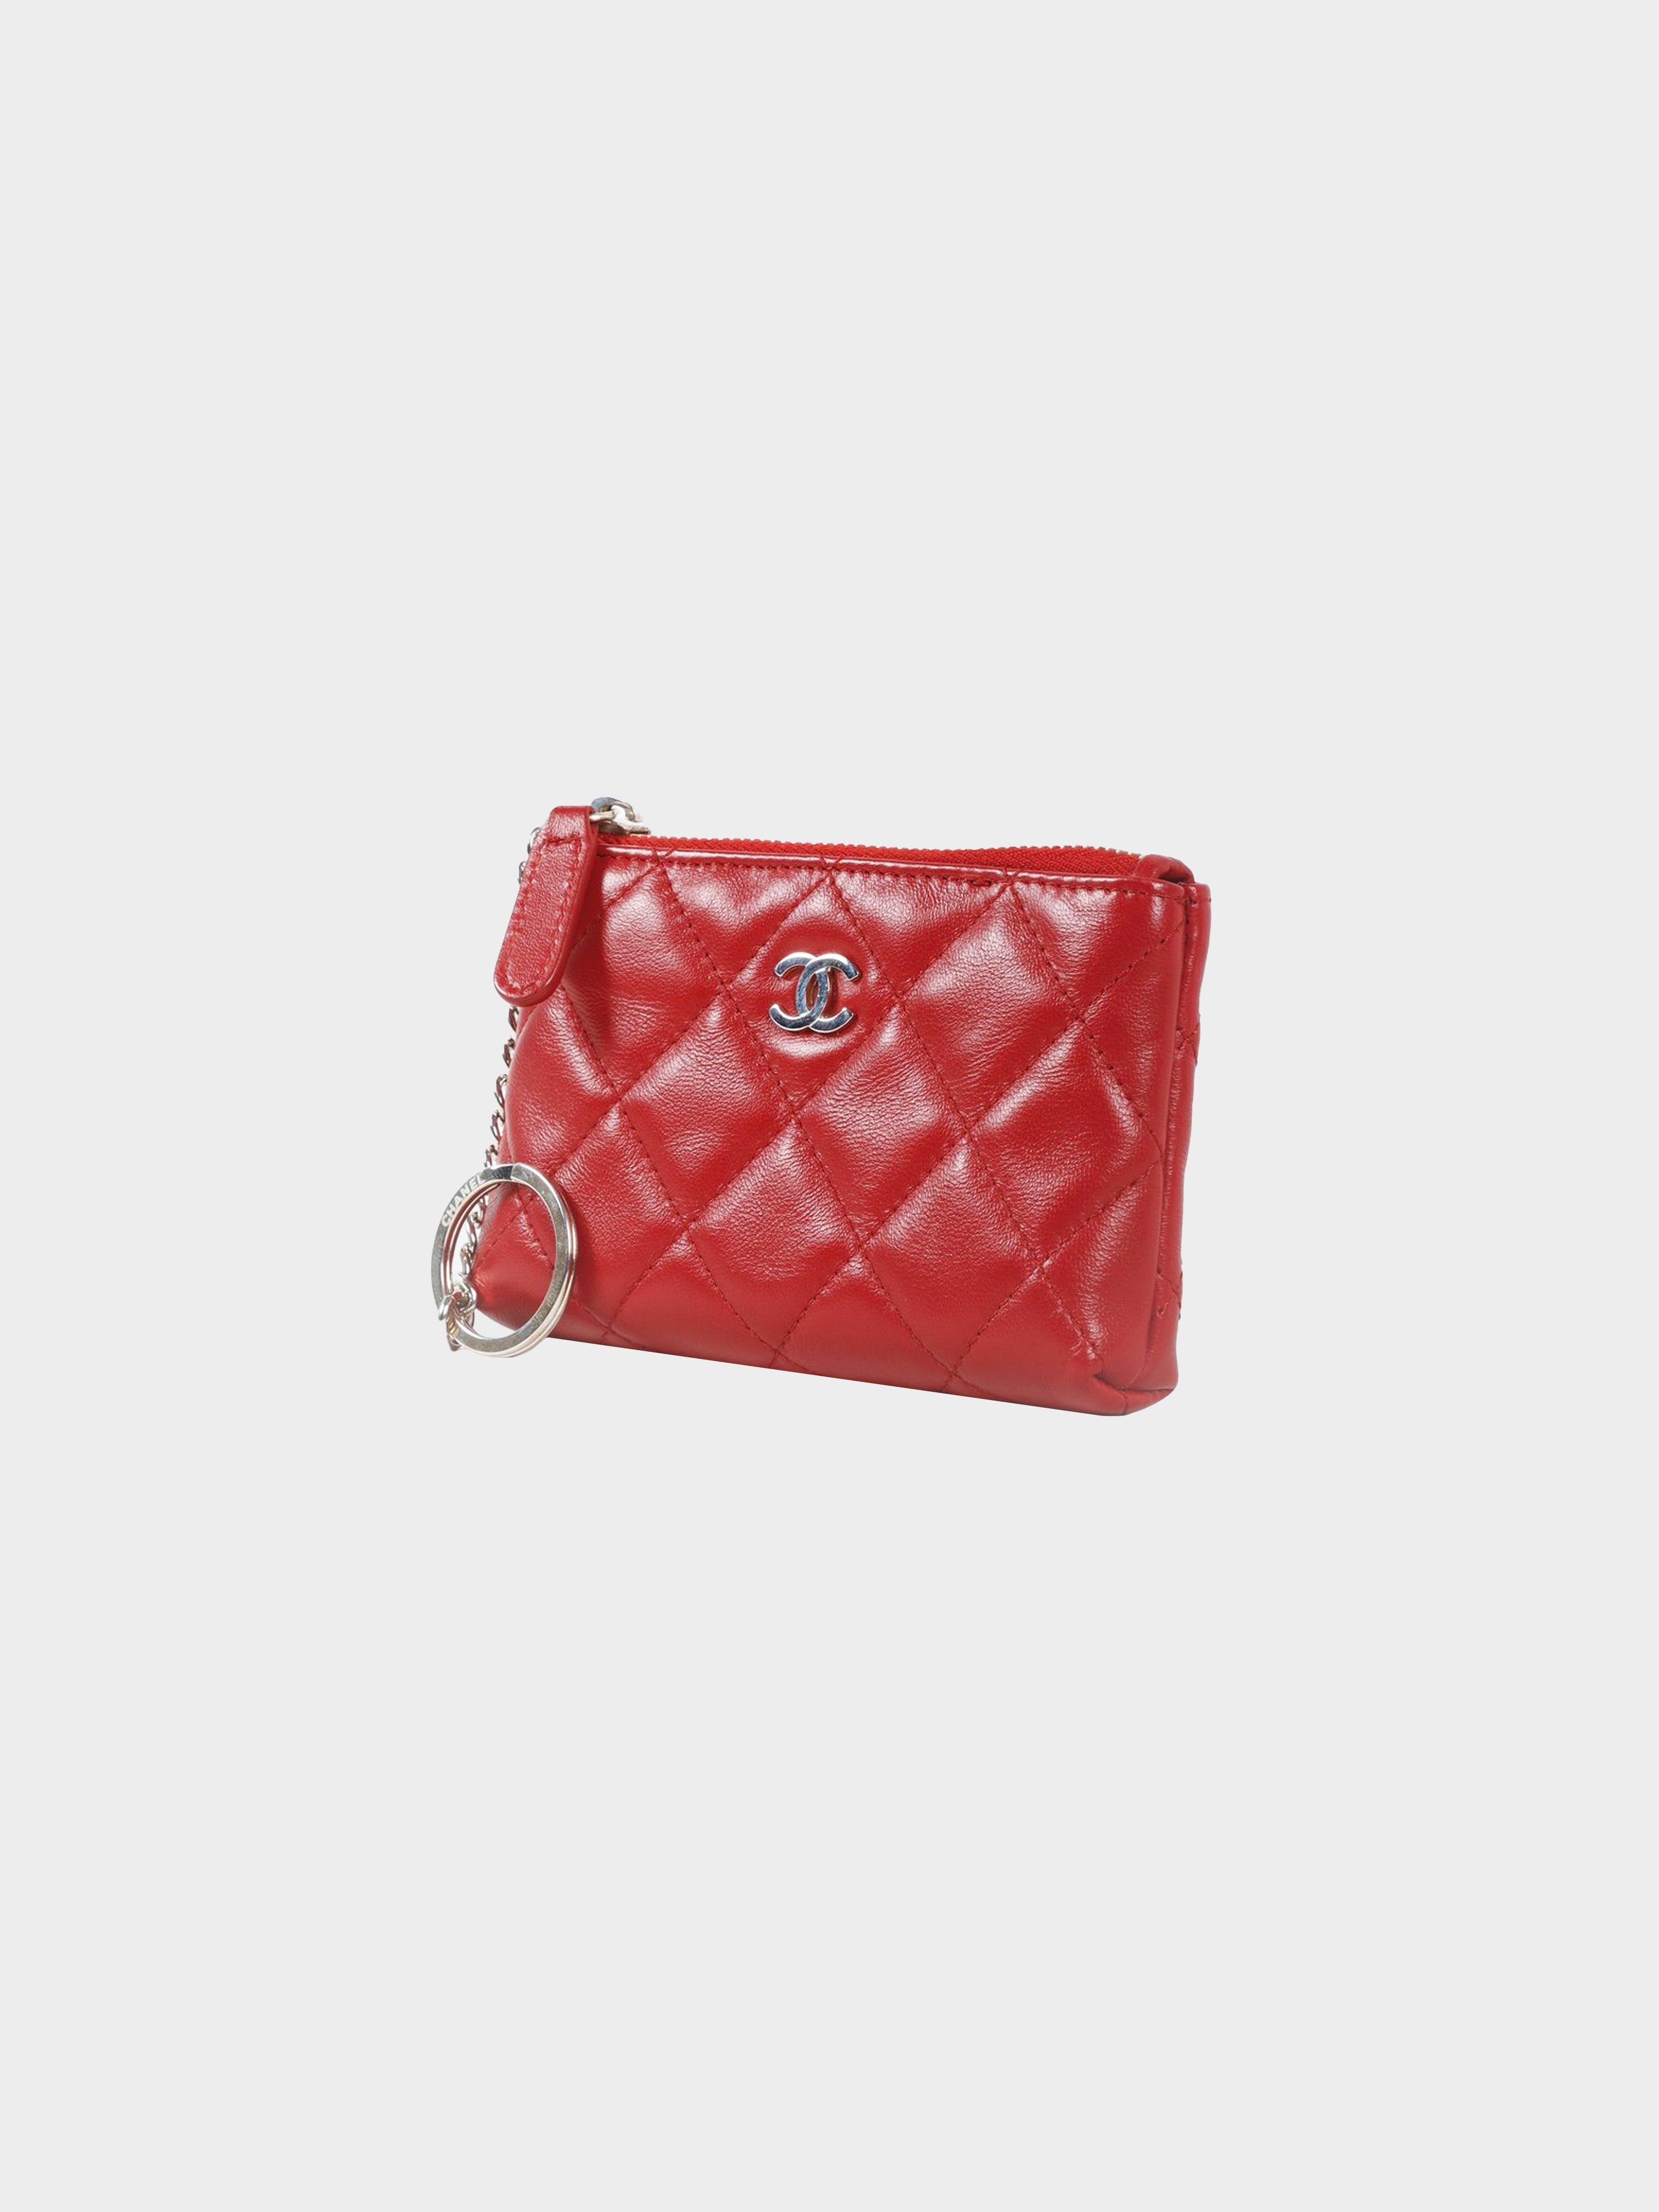 Chanel Pre-owned 1992 CC Stitch Key Pouch - Red